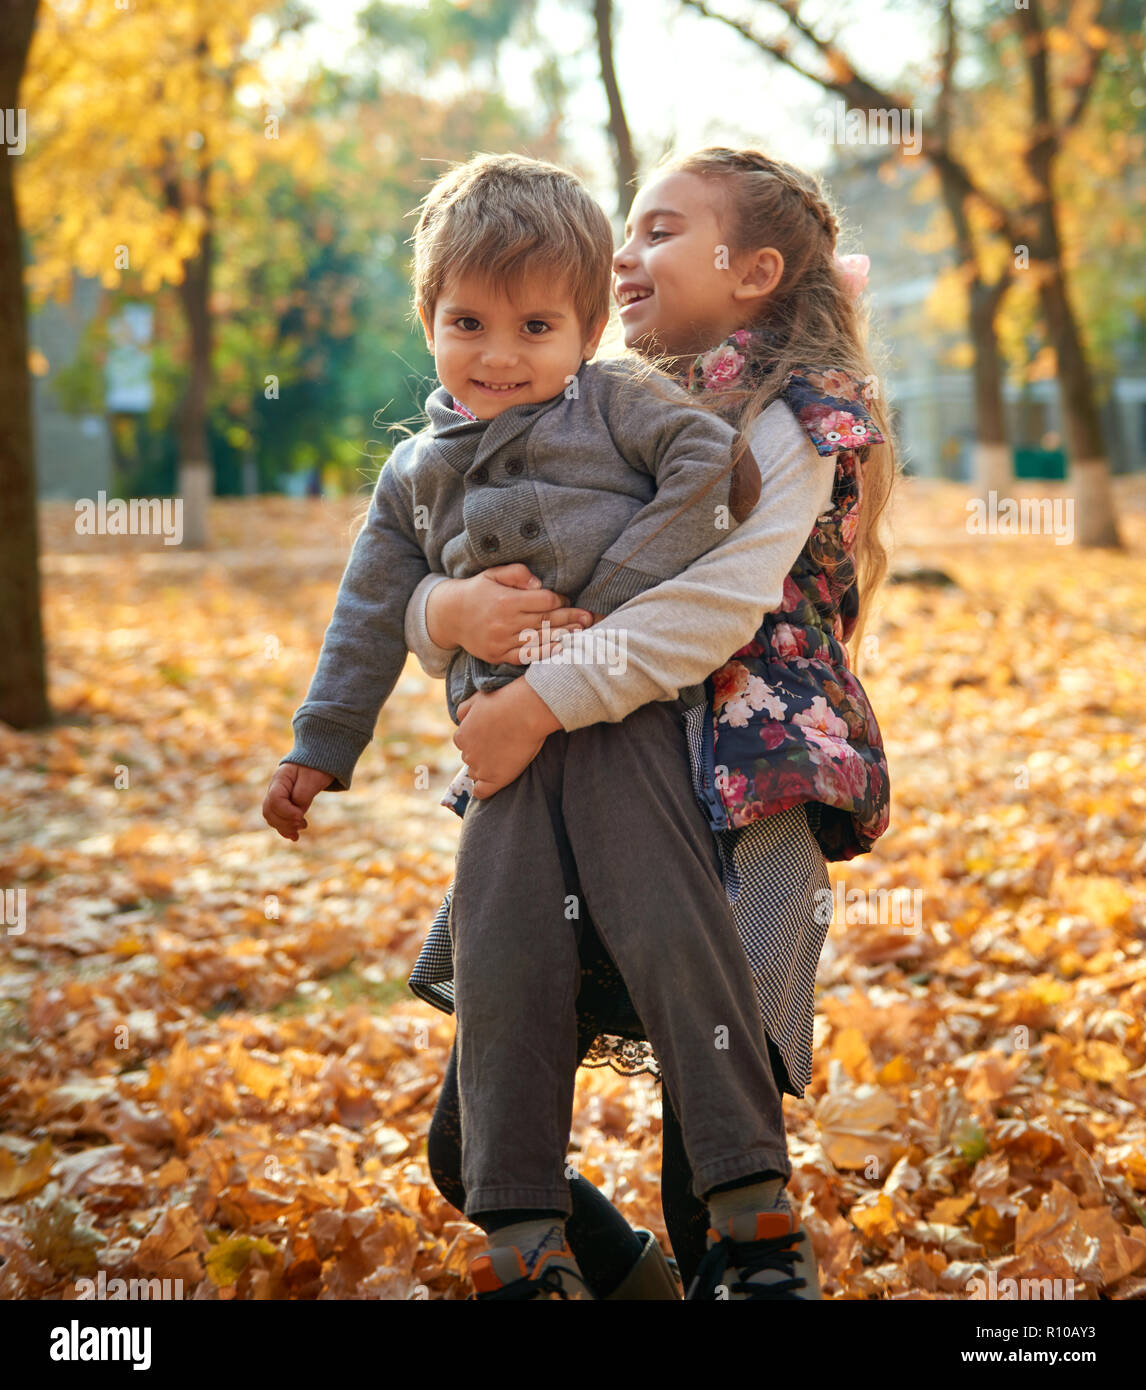 Children are playing on fallen leaves in autumn city park. Stock Photo